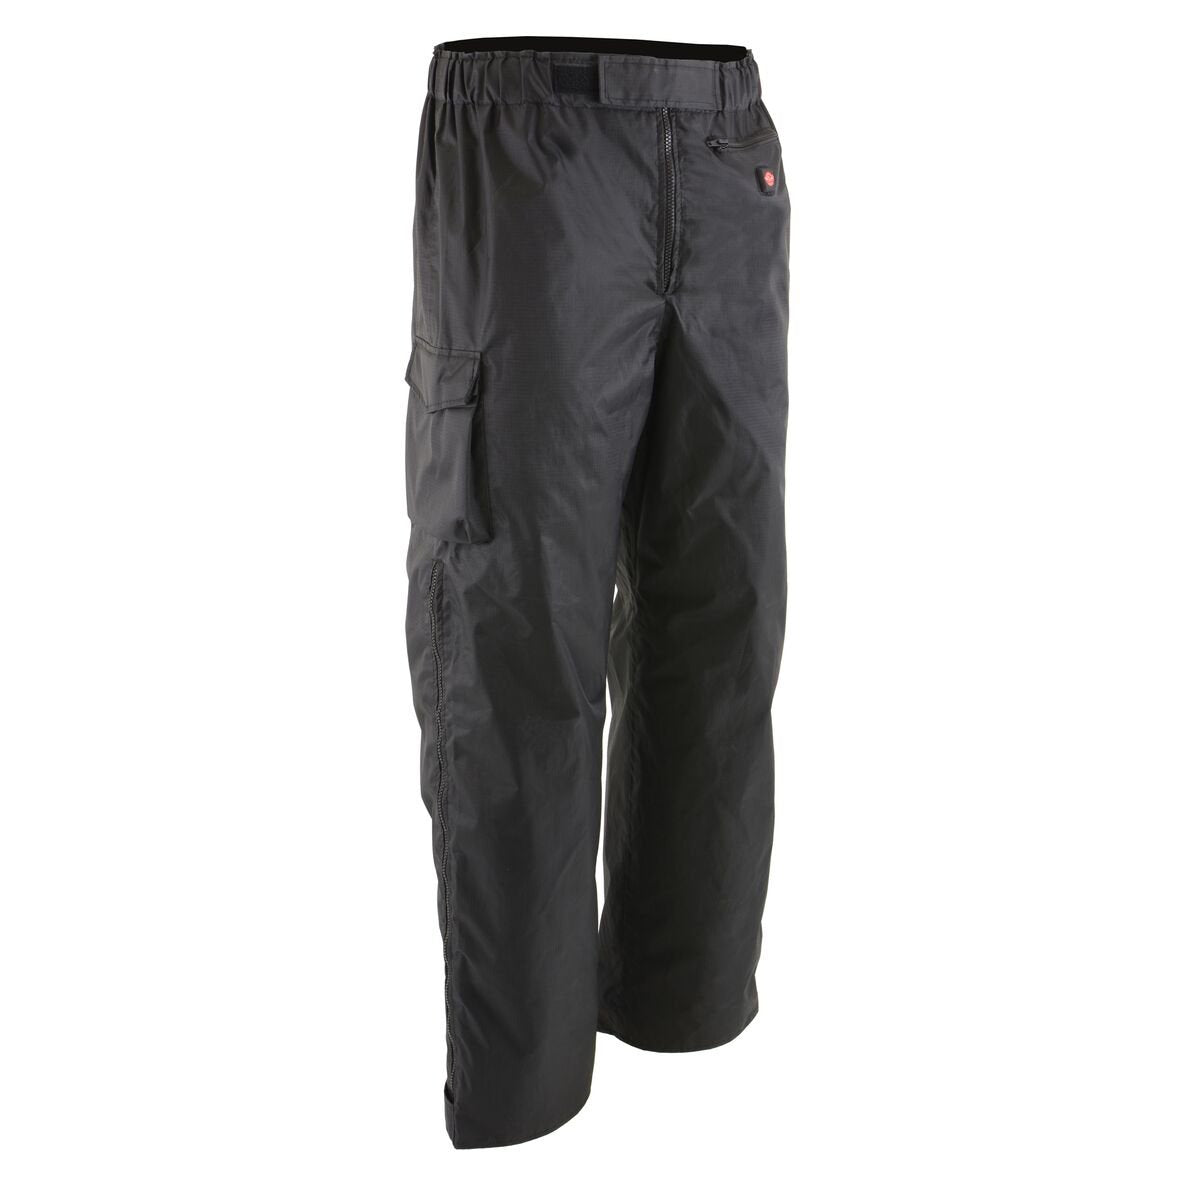 Image of NexGen Heat MPM5715SET Men Black Winter Thermal Heated Pants for Ski and Riding w/ Rechargable Battery Pack